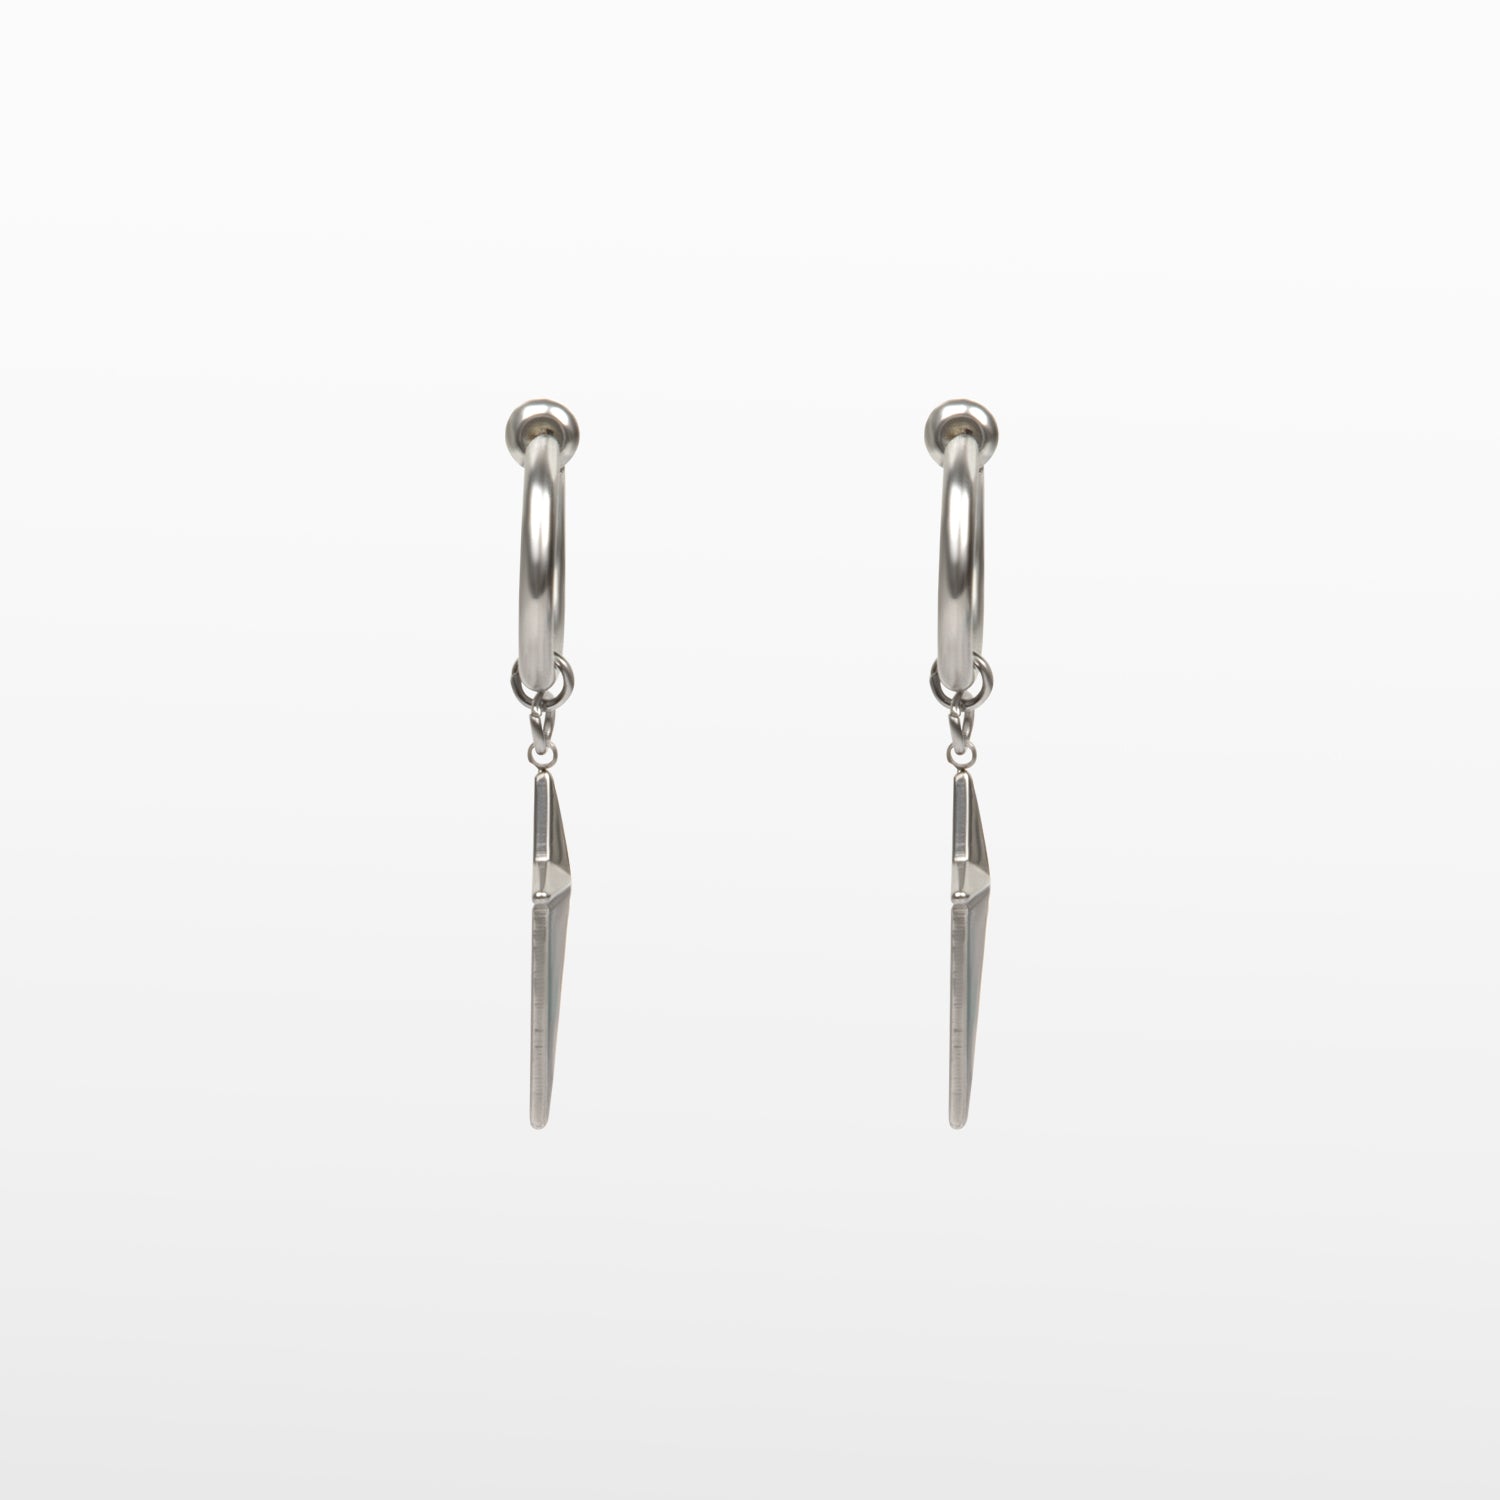 Image of the Altair Clip On Earrings offer a secure and adjustable closure that are perfect for those with thin ear lobes. Crafted with stainless steel and featuring non-tarnish and water-resistant properties, these earrings are hypoallergenic, lead and nickel free. The average comfortable wear duration is 2 to 4 hours. The item is sold as one pair.